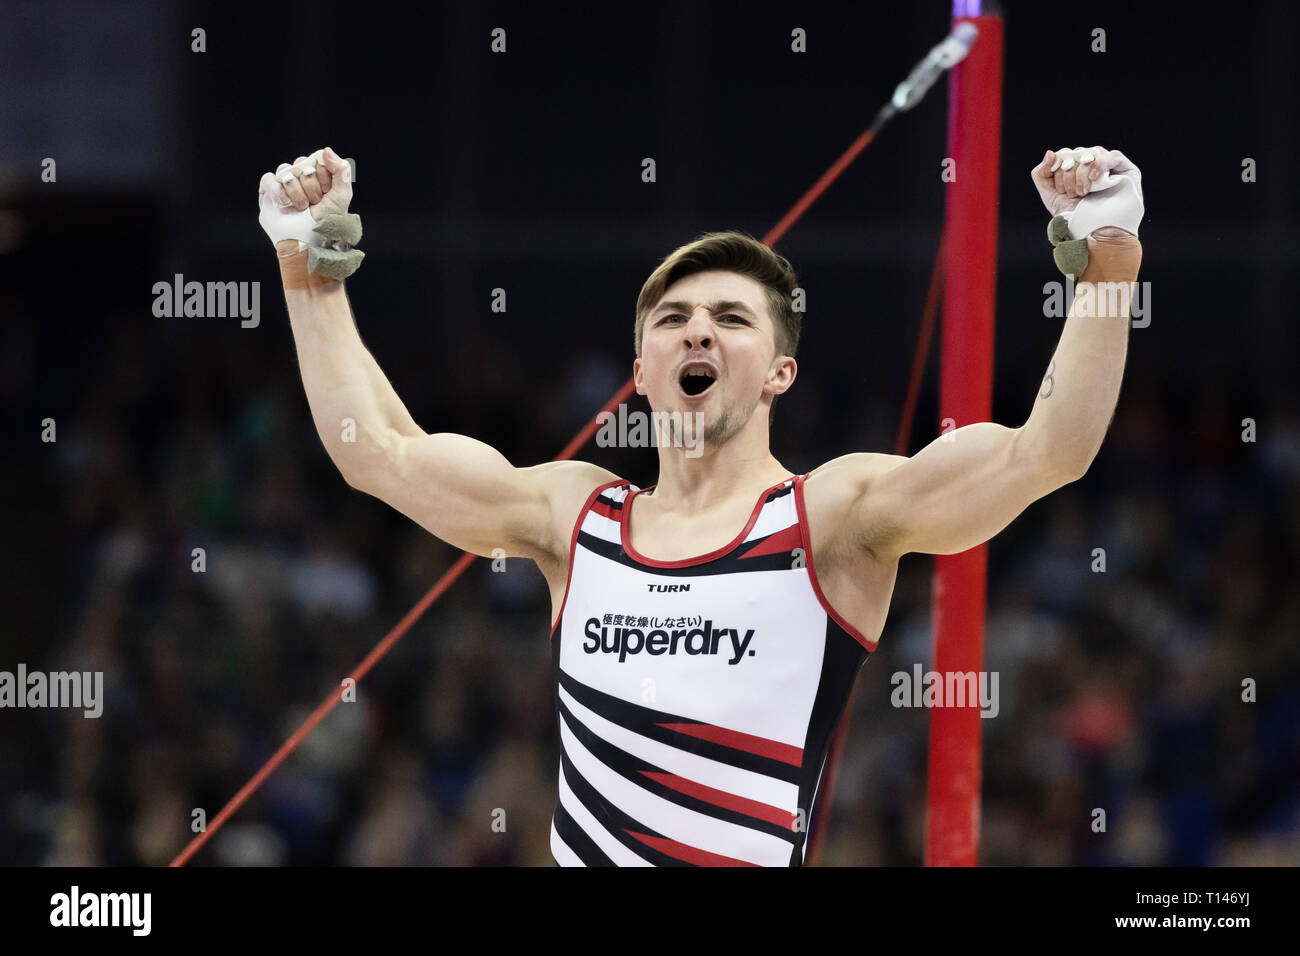 London, UK. 23rd March, 2019. Sam Oldham performs High Bar during the Matchroom Multisport presents the 2019 Superstars of Gymnastics at The O2 Arena on Saturday, 23 March 2019. LONDON ENGLAND. Credit: Taka G Wu/Alamy News Stock Photo